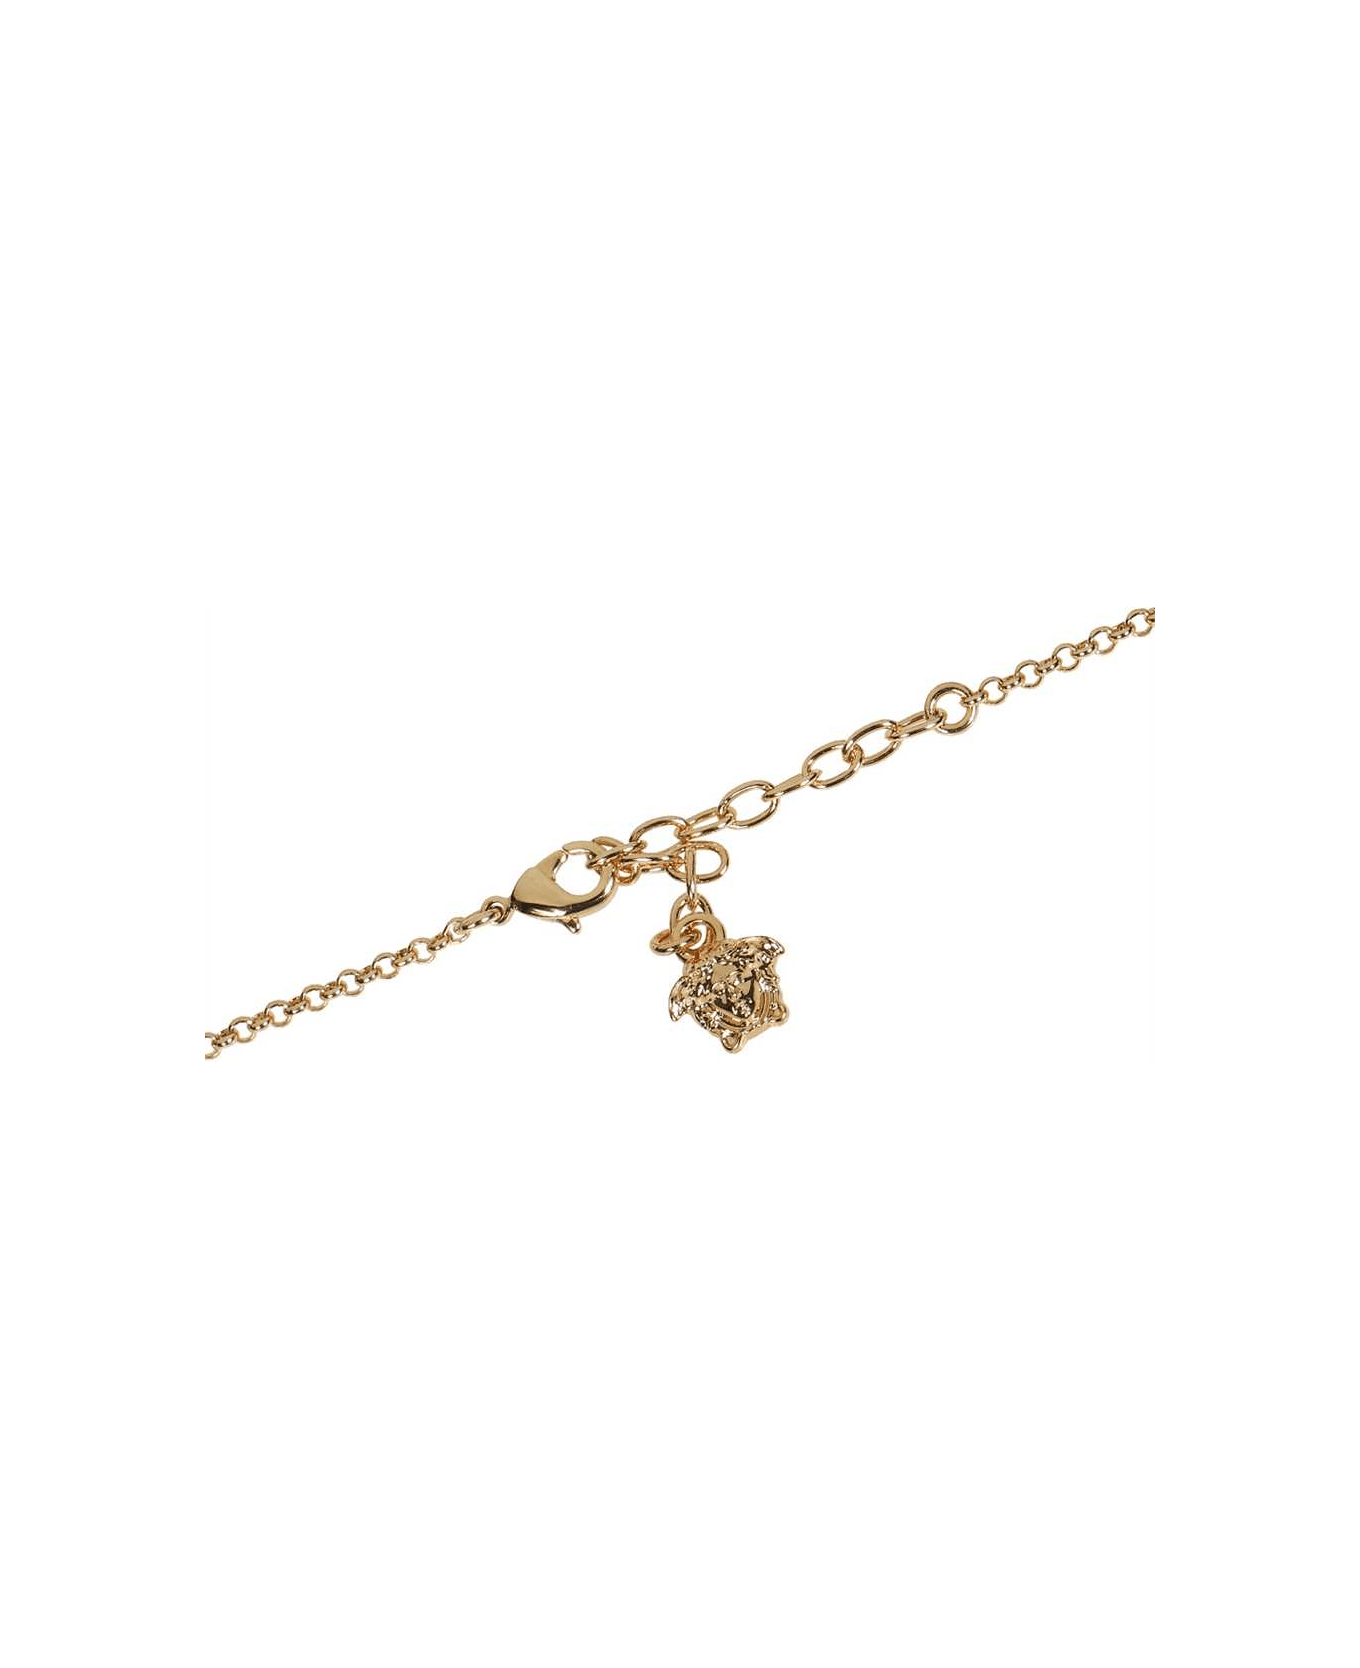 Versace Decorative Pendant Necklace - Gold ネックレス